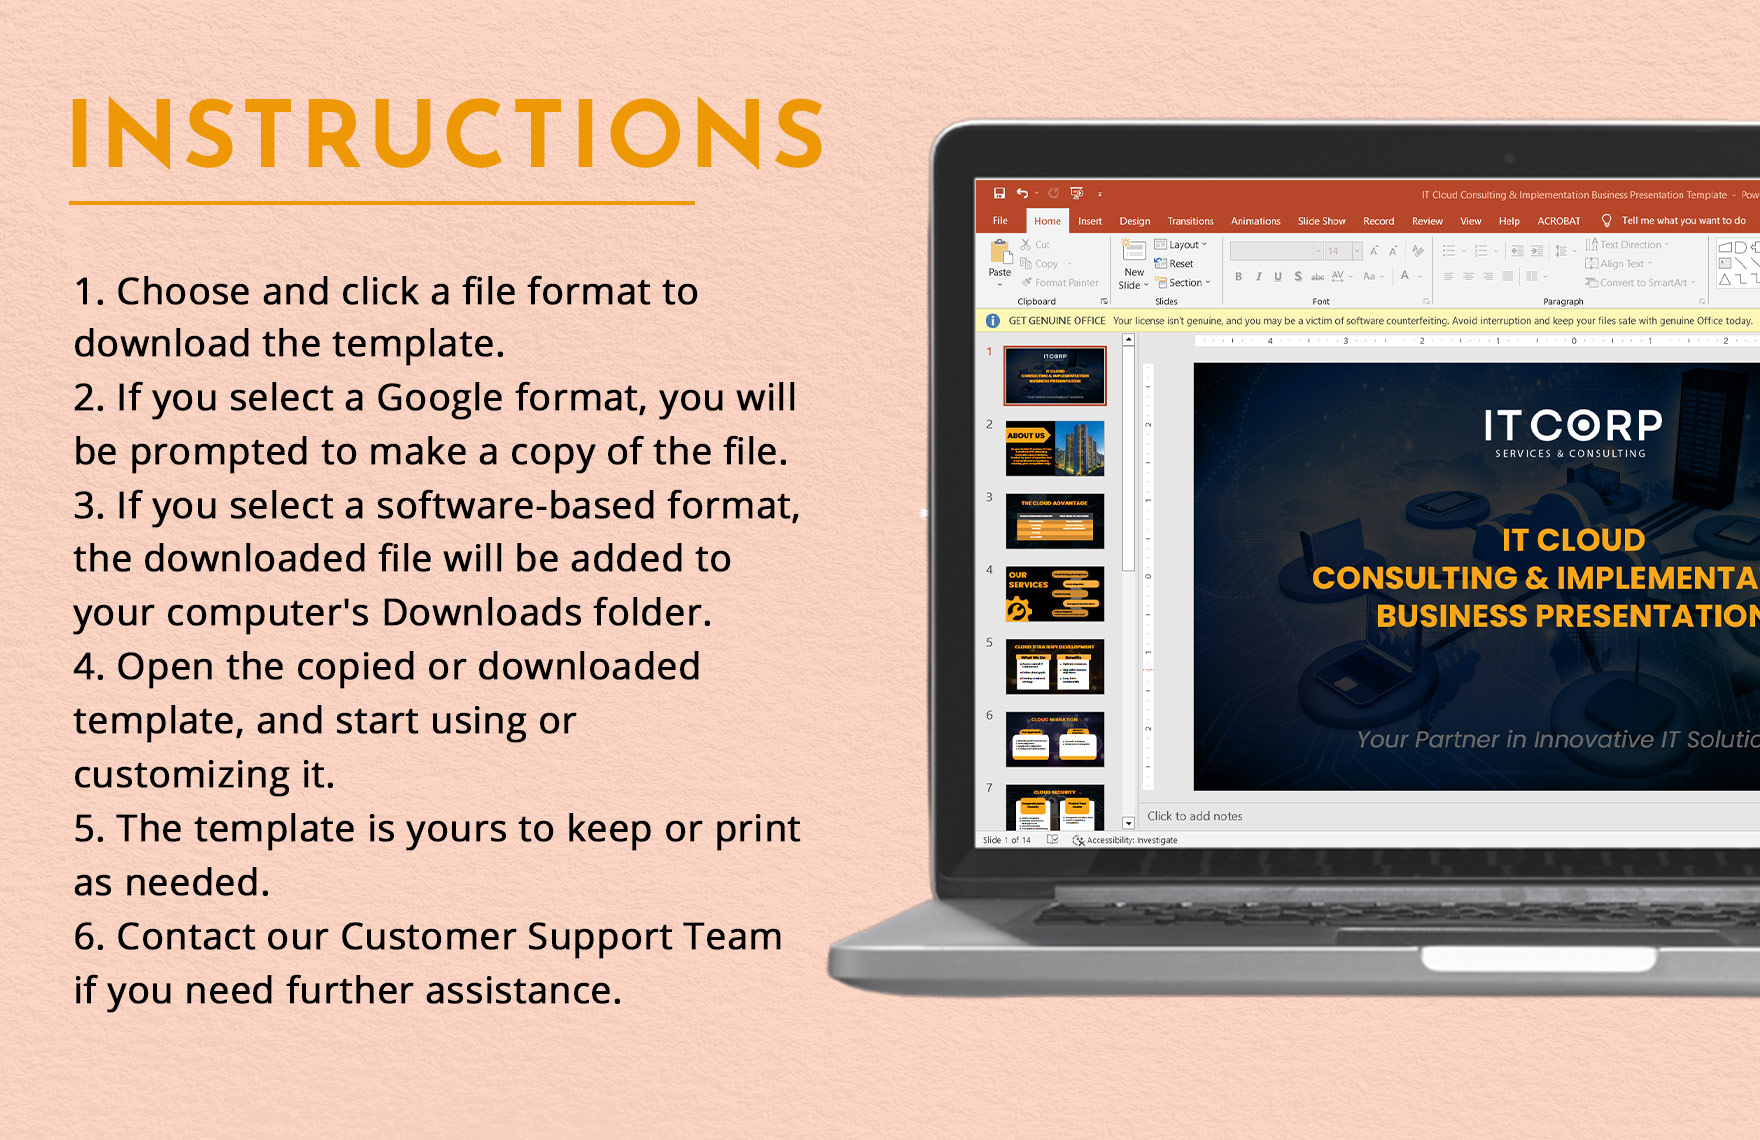 IT Cloud Consulting & Implementation Business Presentation Template